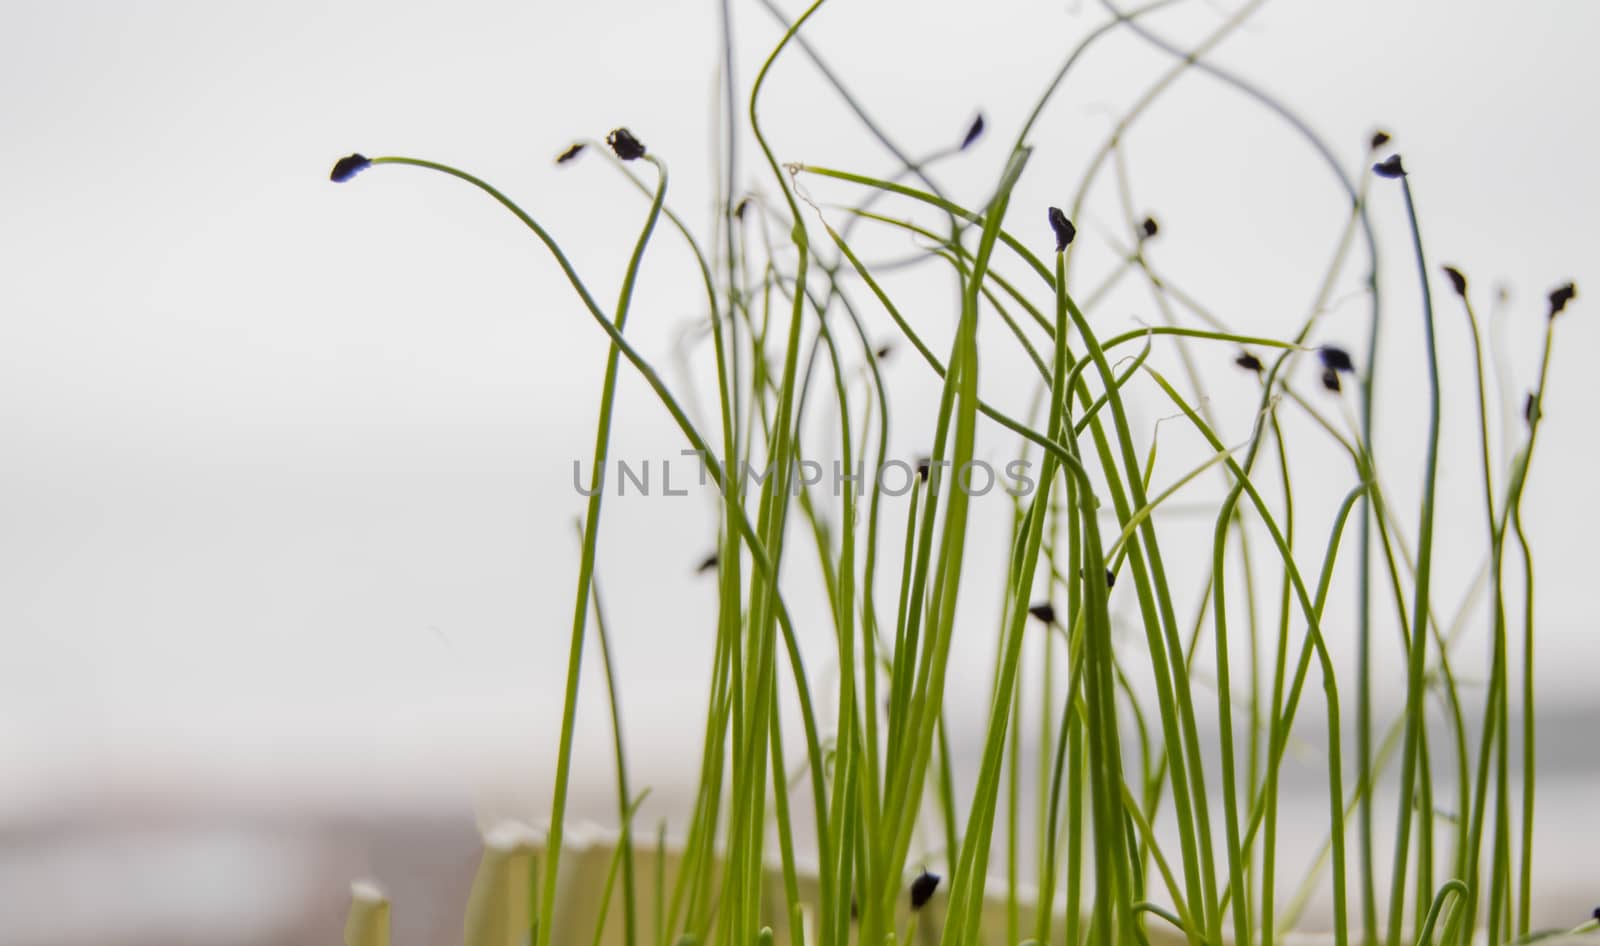 Young shoots of plants germinated from seed, the concept of the step of cultivation of seeds of agricultural plants, blurred background, bokeh.